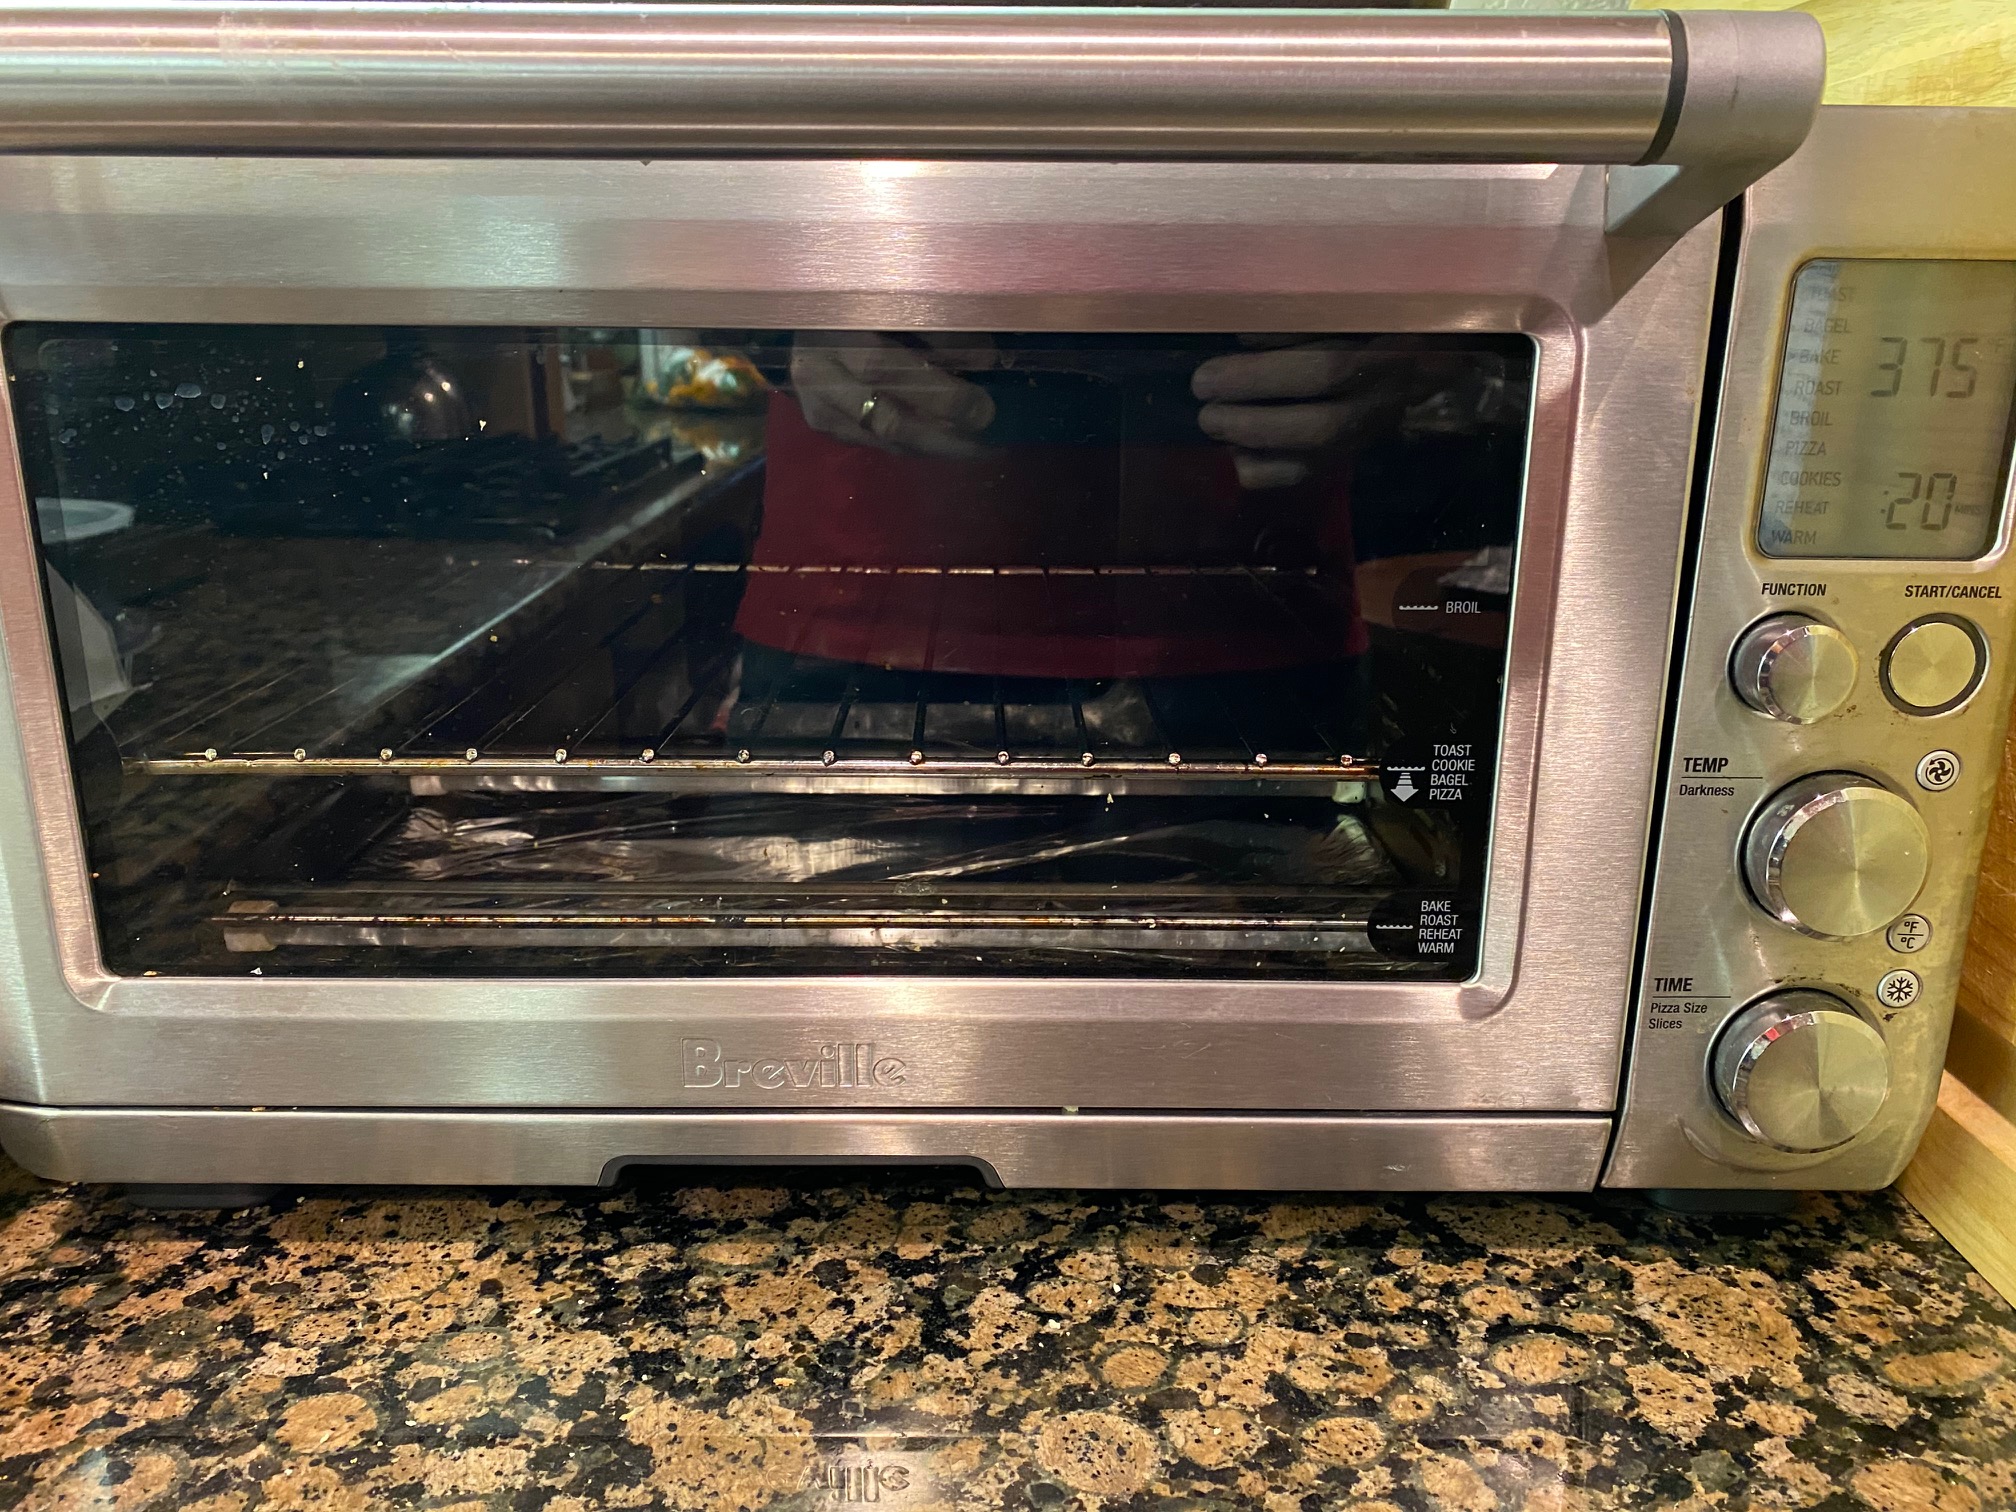 Convection oven using 400 degrees for 20 minutes